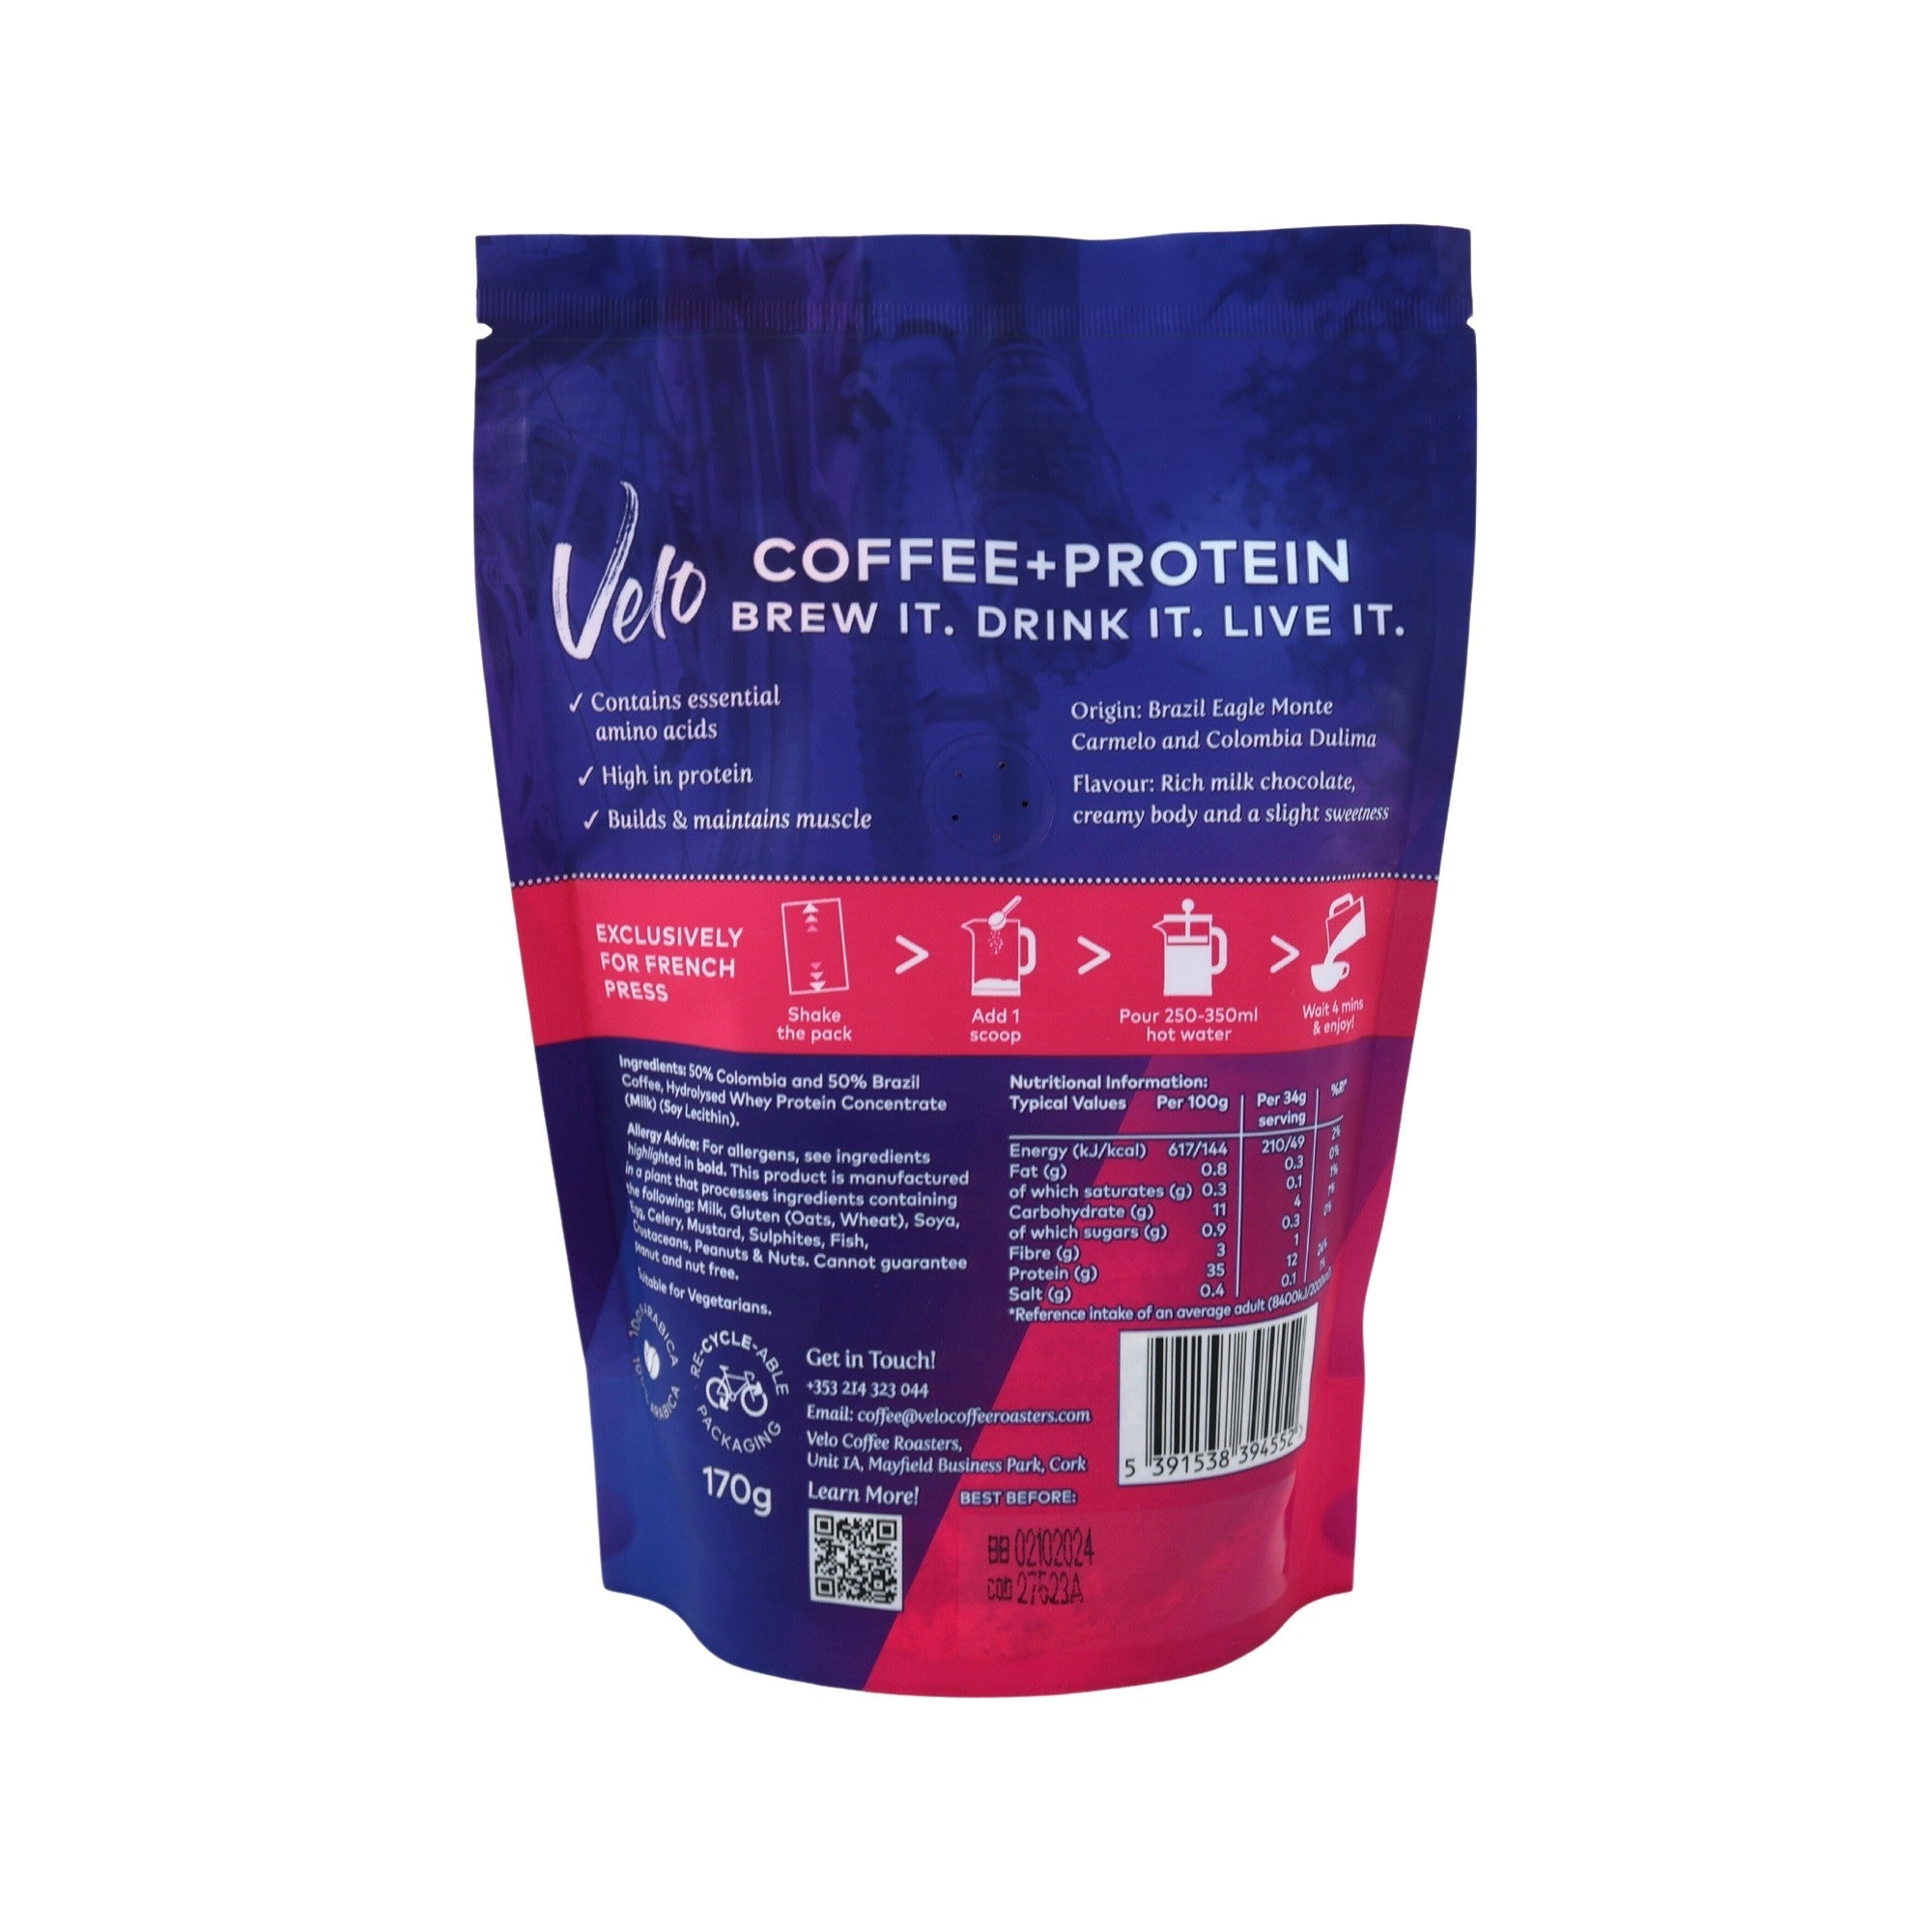 Velo Coffee + Protein -Velo Coffee + Protein - Pink and Purple Bag Ground for French Press Coffee